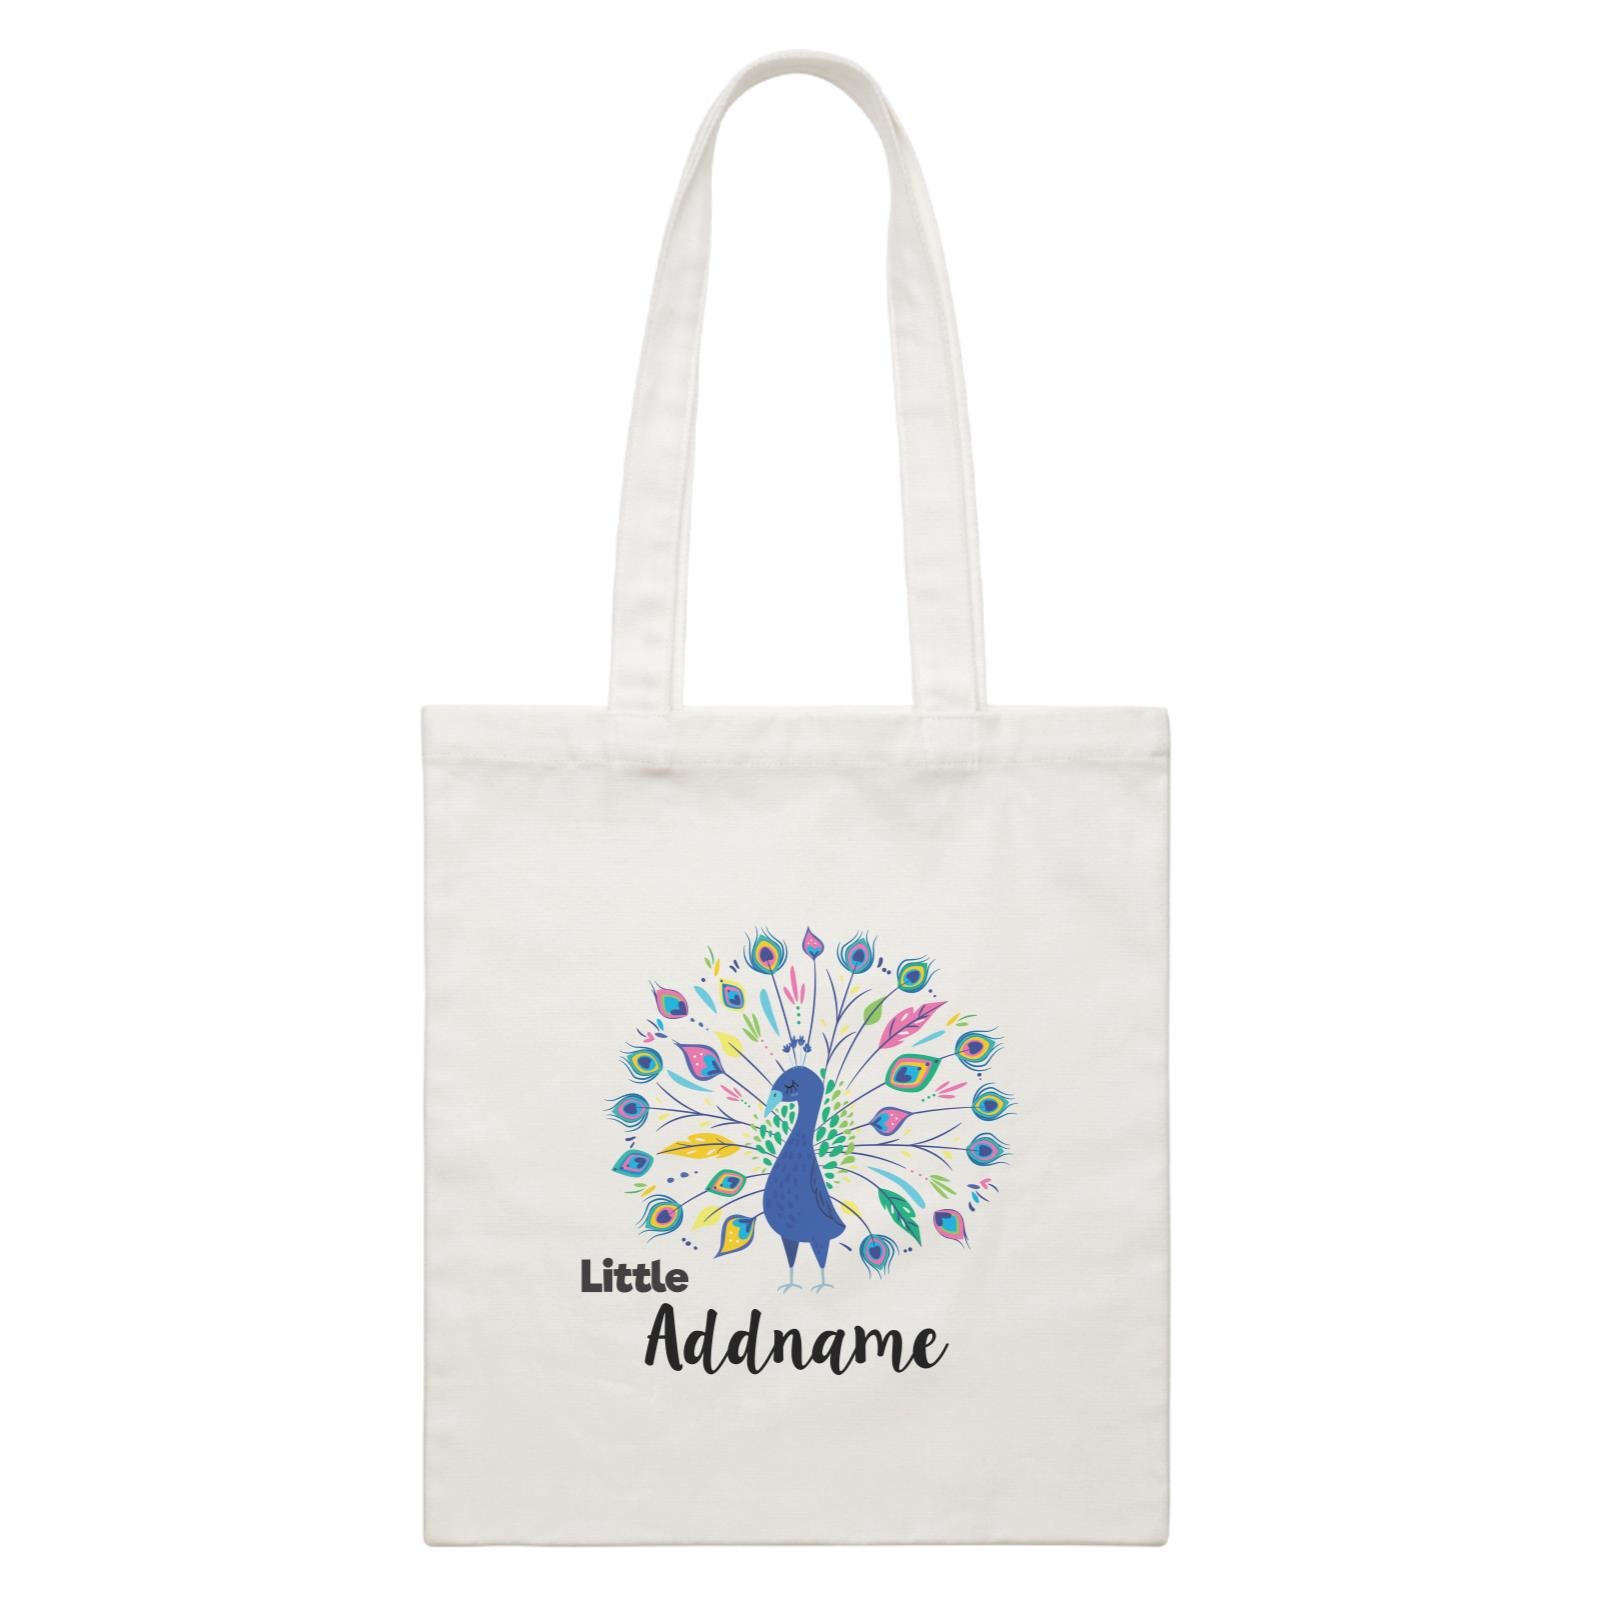 Deepavali Colourful Sweet Little Peacock Addname White Canvas Bag